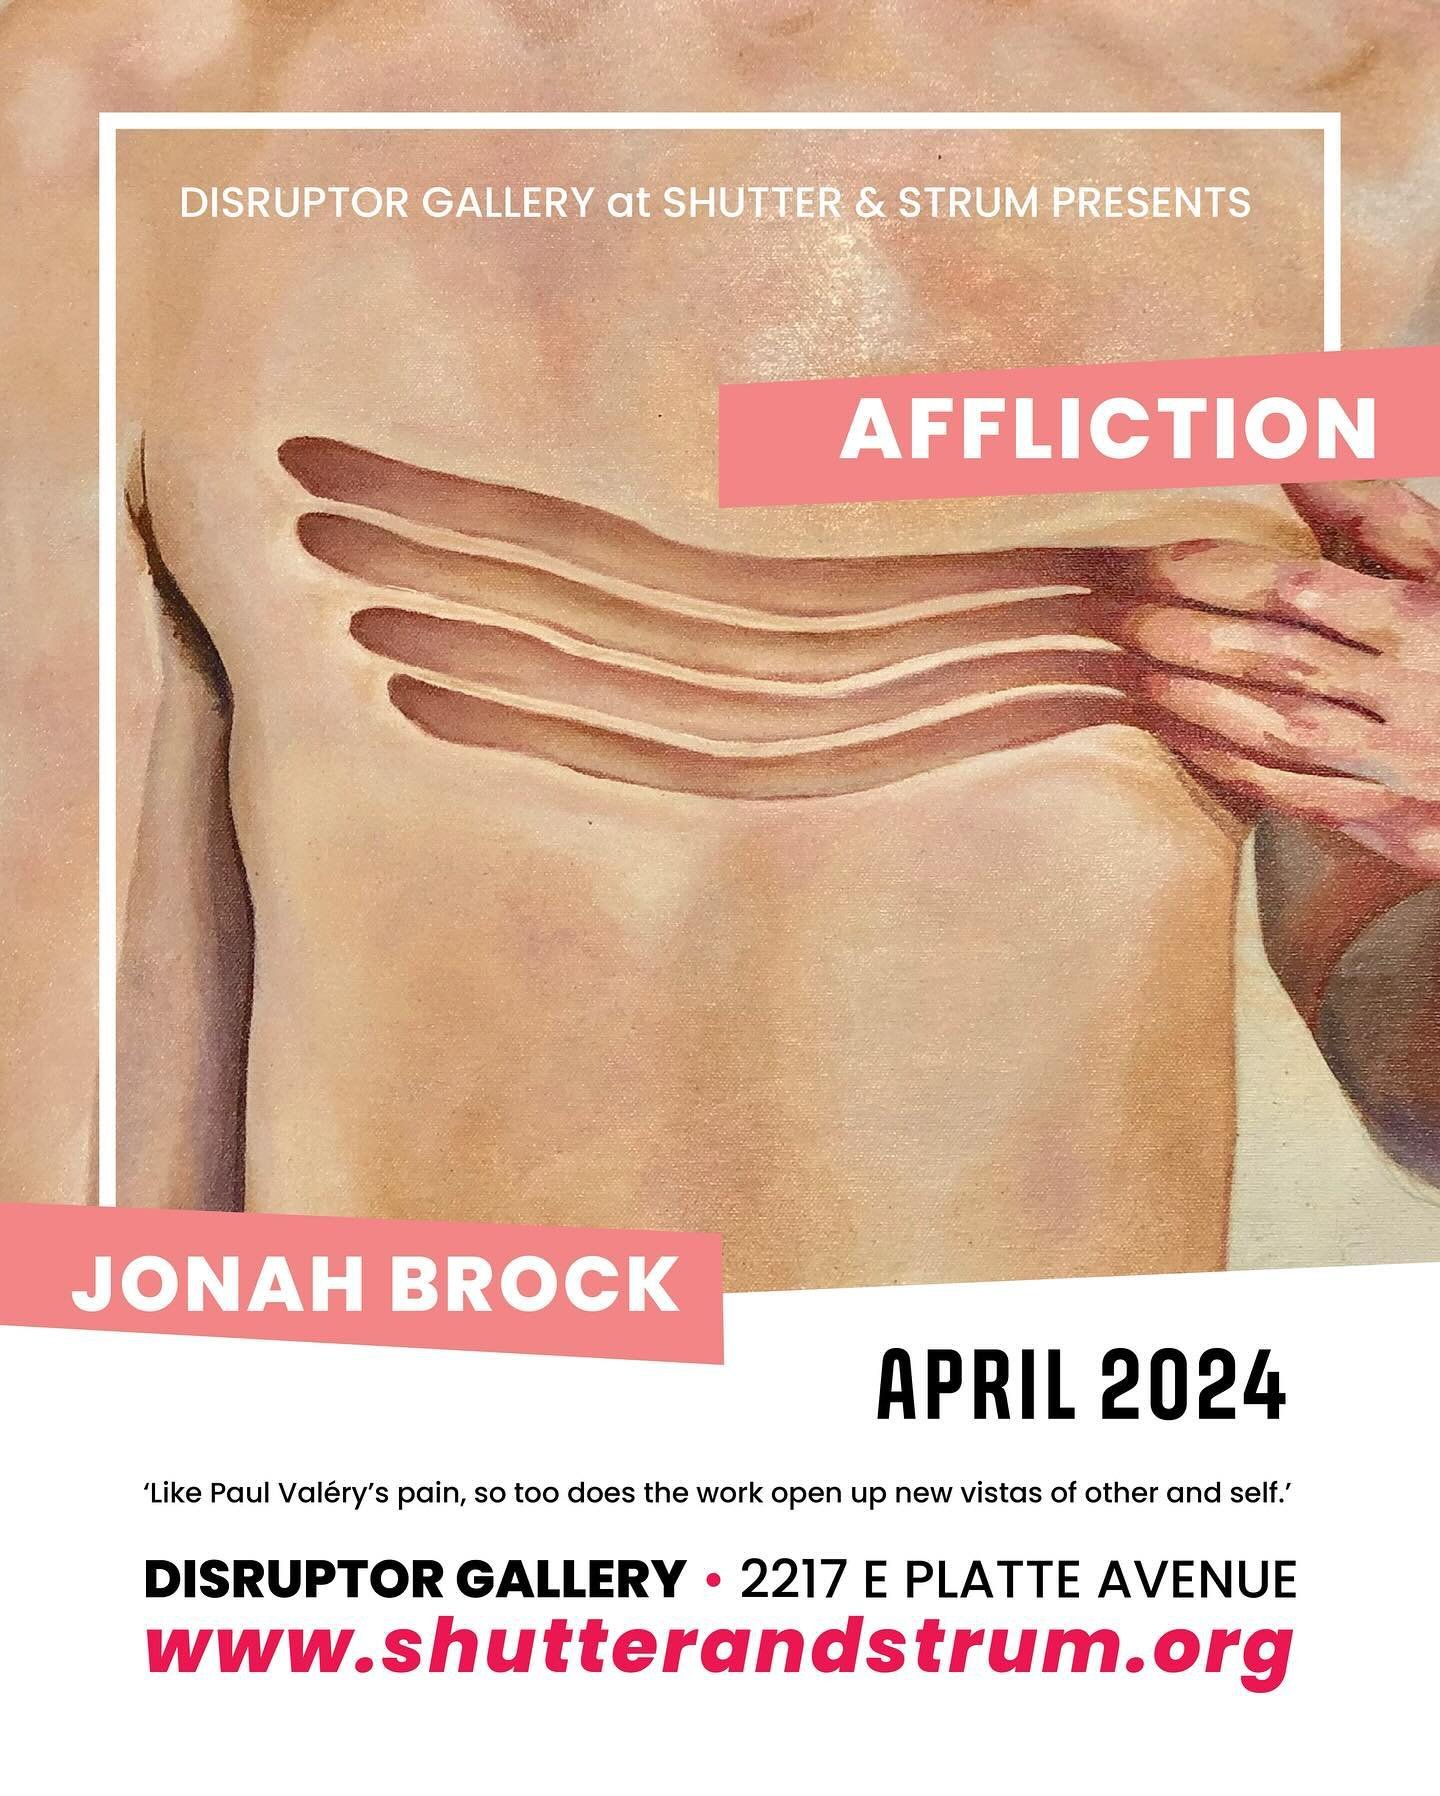 Yo! Friday will be the last opportunity to see our featured artist for April @jonahbrock.art work.
We are open 12-4
#supportlocalartists #supportcommunity